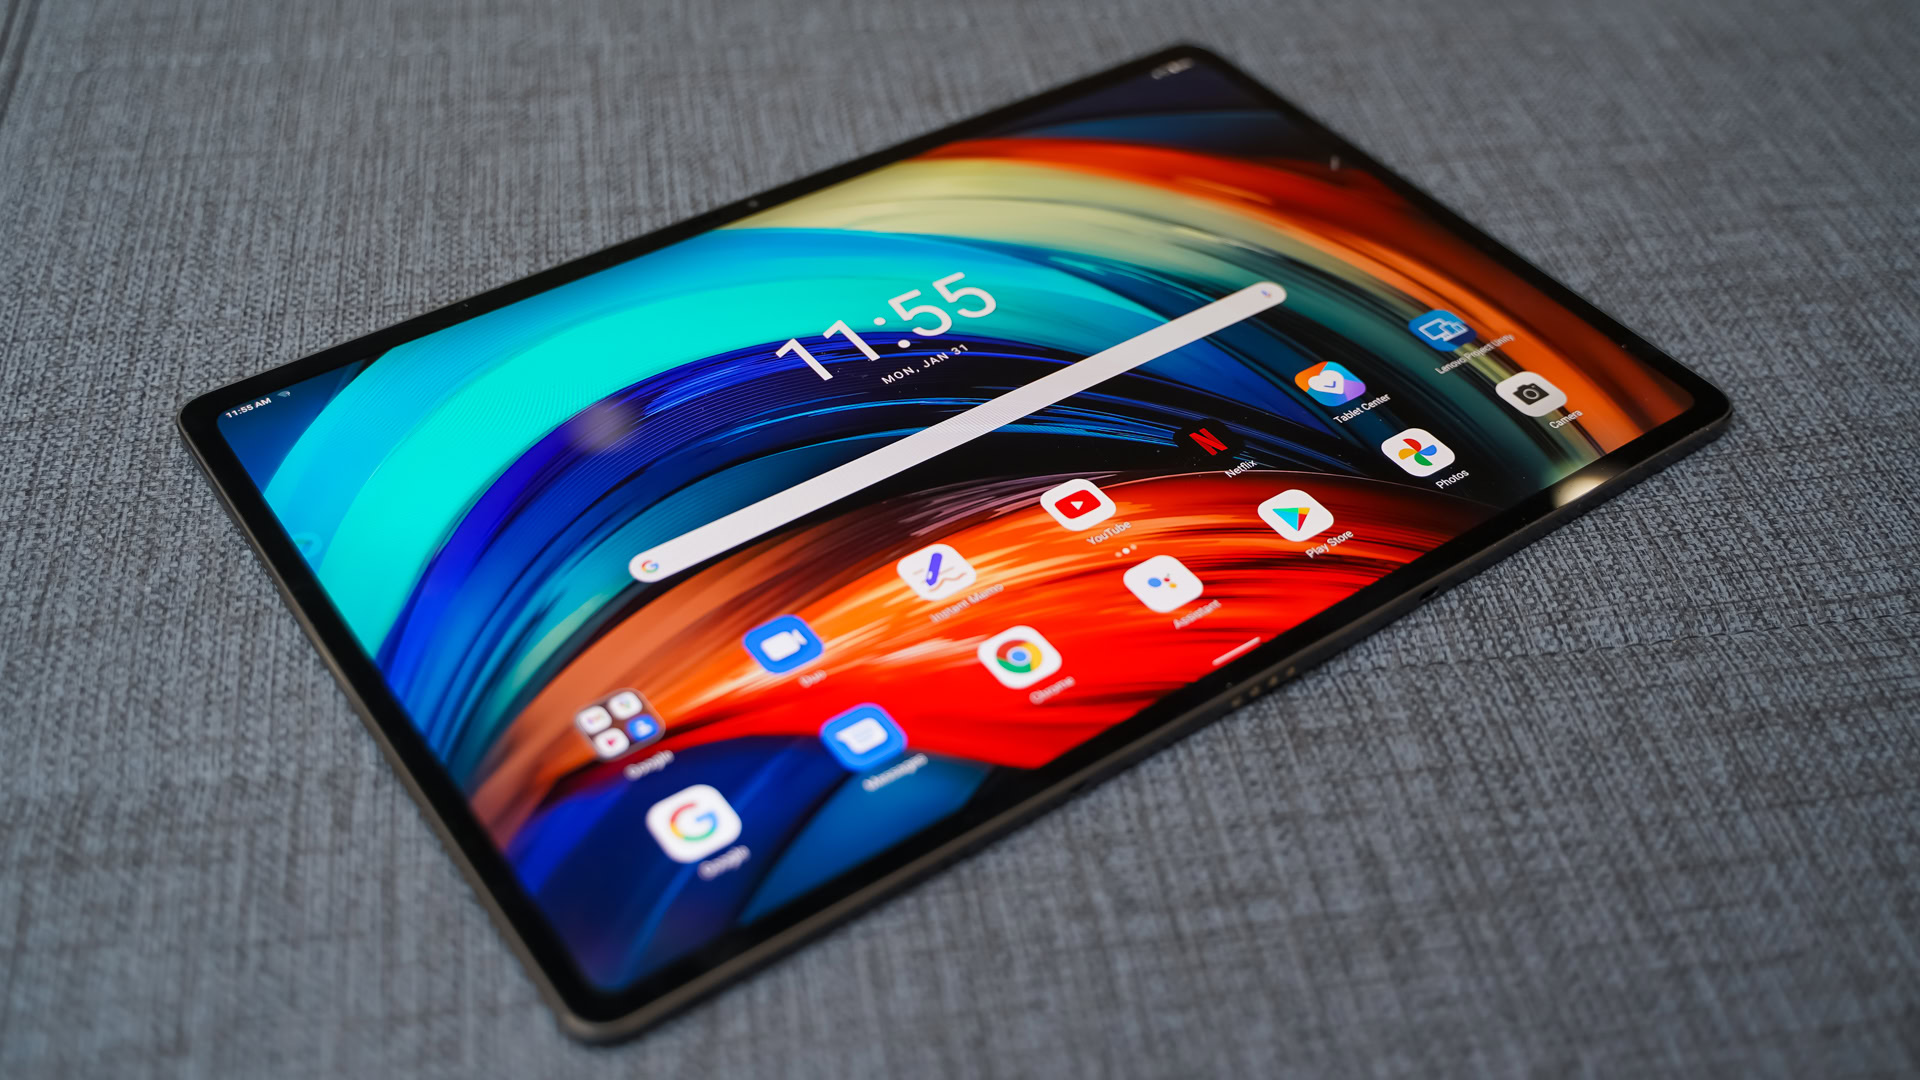 Lenovo Tab P12 Pro review: The flagship Android tablet shoots for the  Galaxy